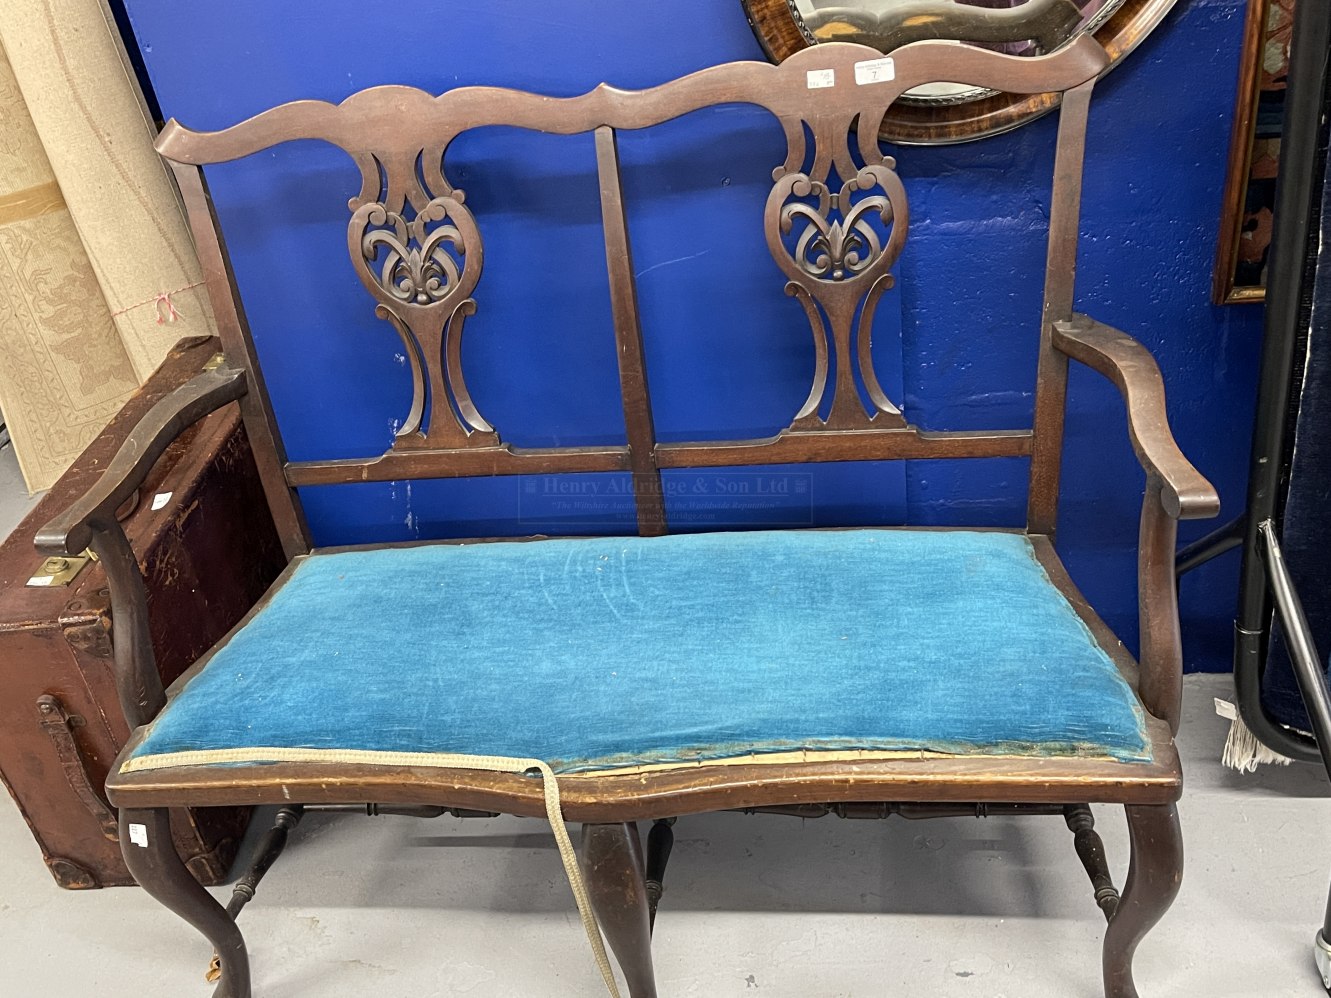 20th Cent. Chippendale style 2 seater hall seat with blue upholstered drop in seat.